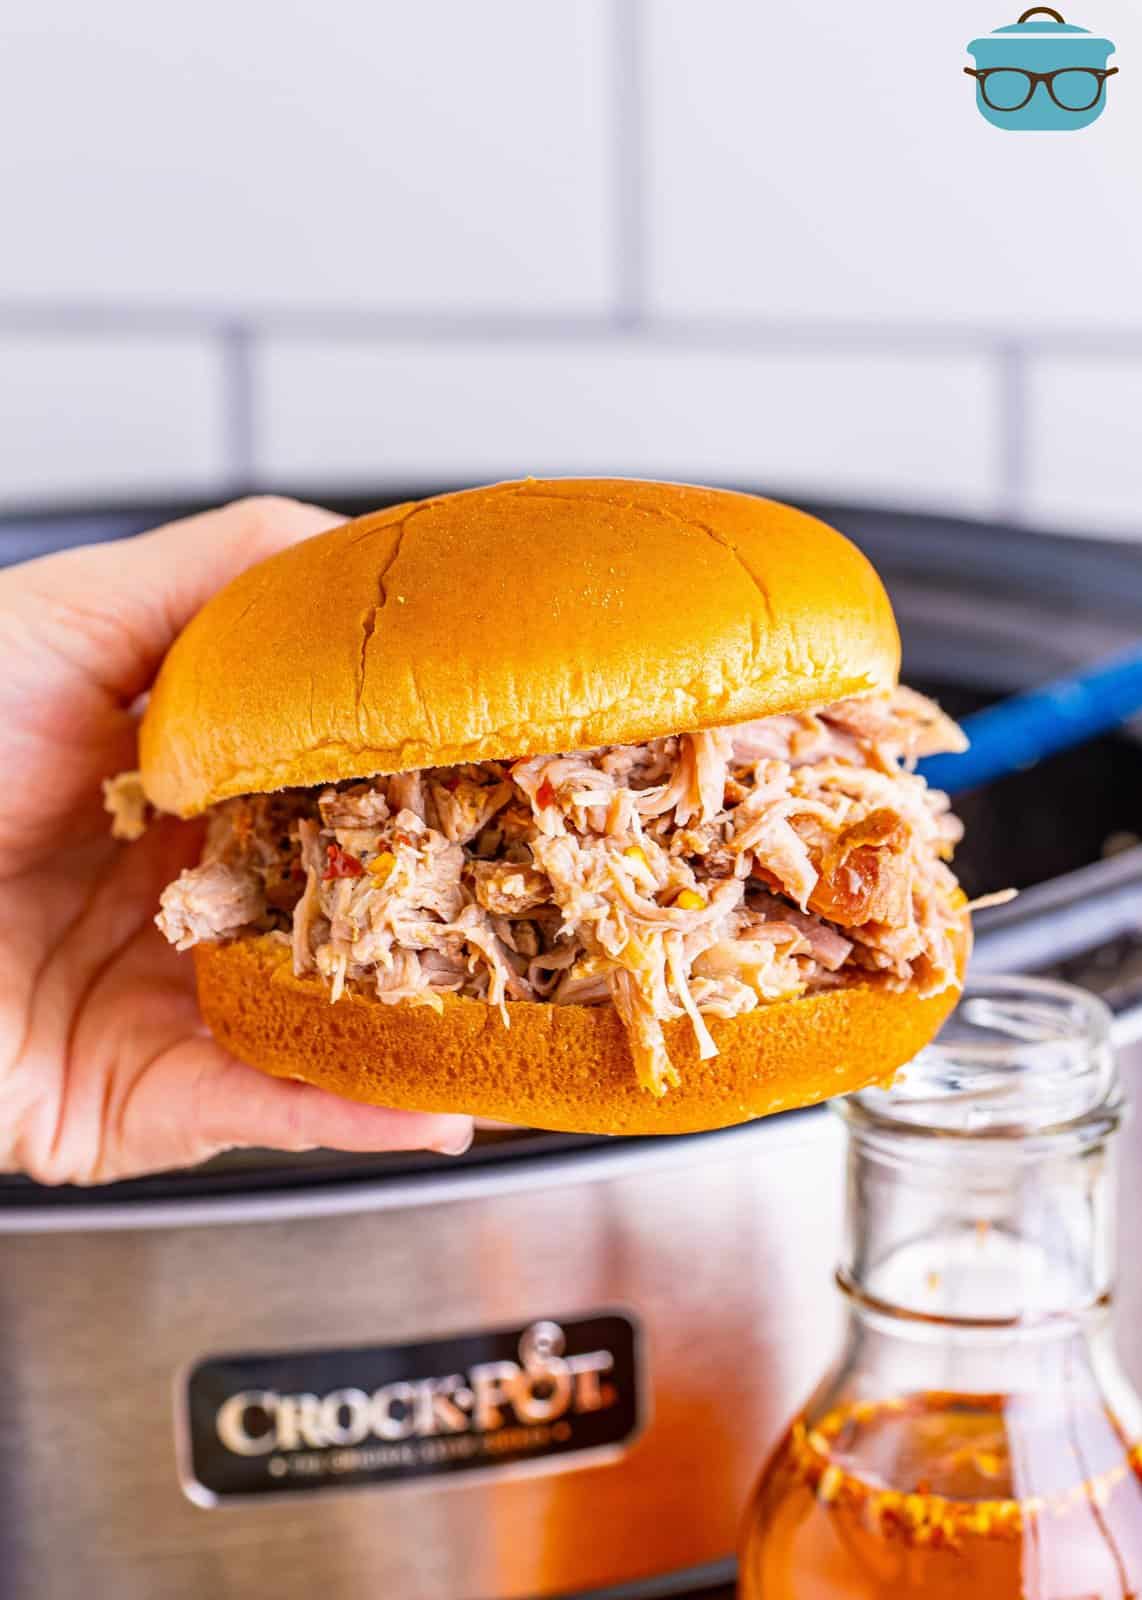 A hand holding a pulled pork sandwich.